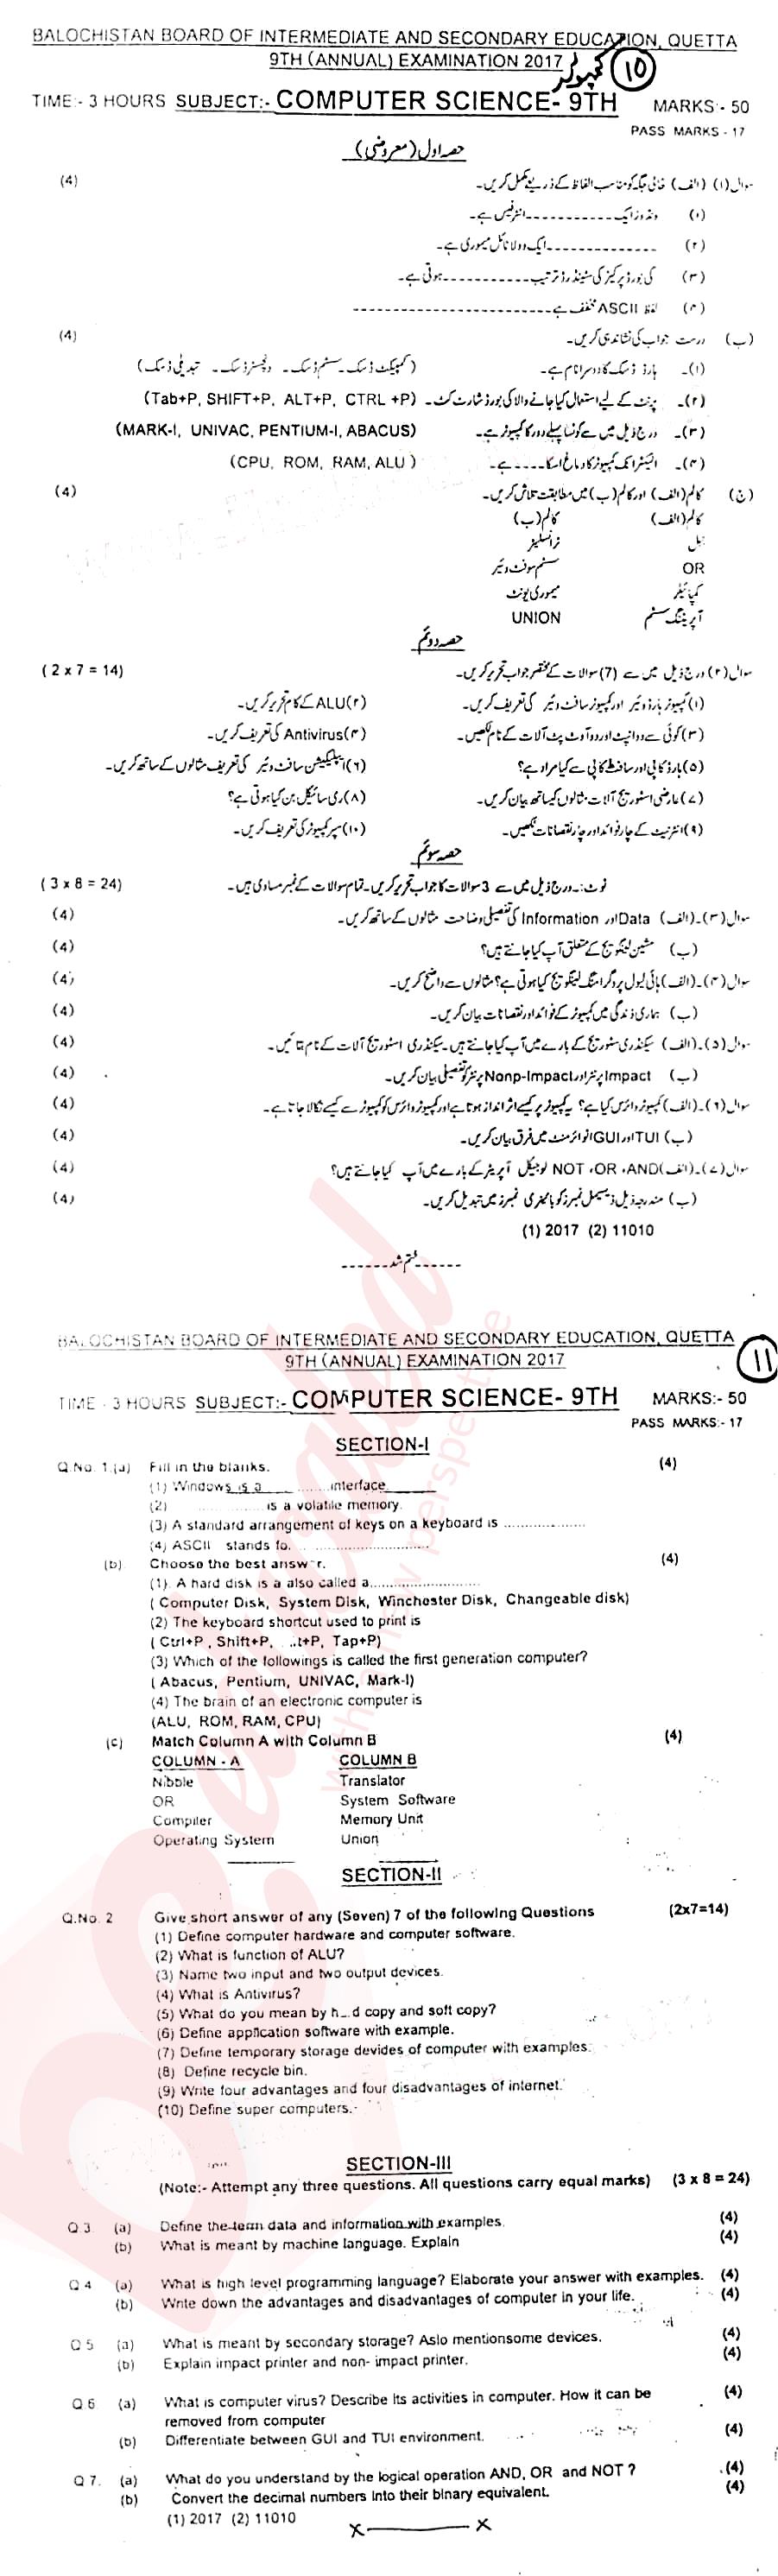 Computer Science 9th class Past Paper Group 1 BISE Quetta 2016